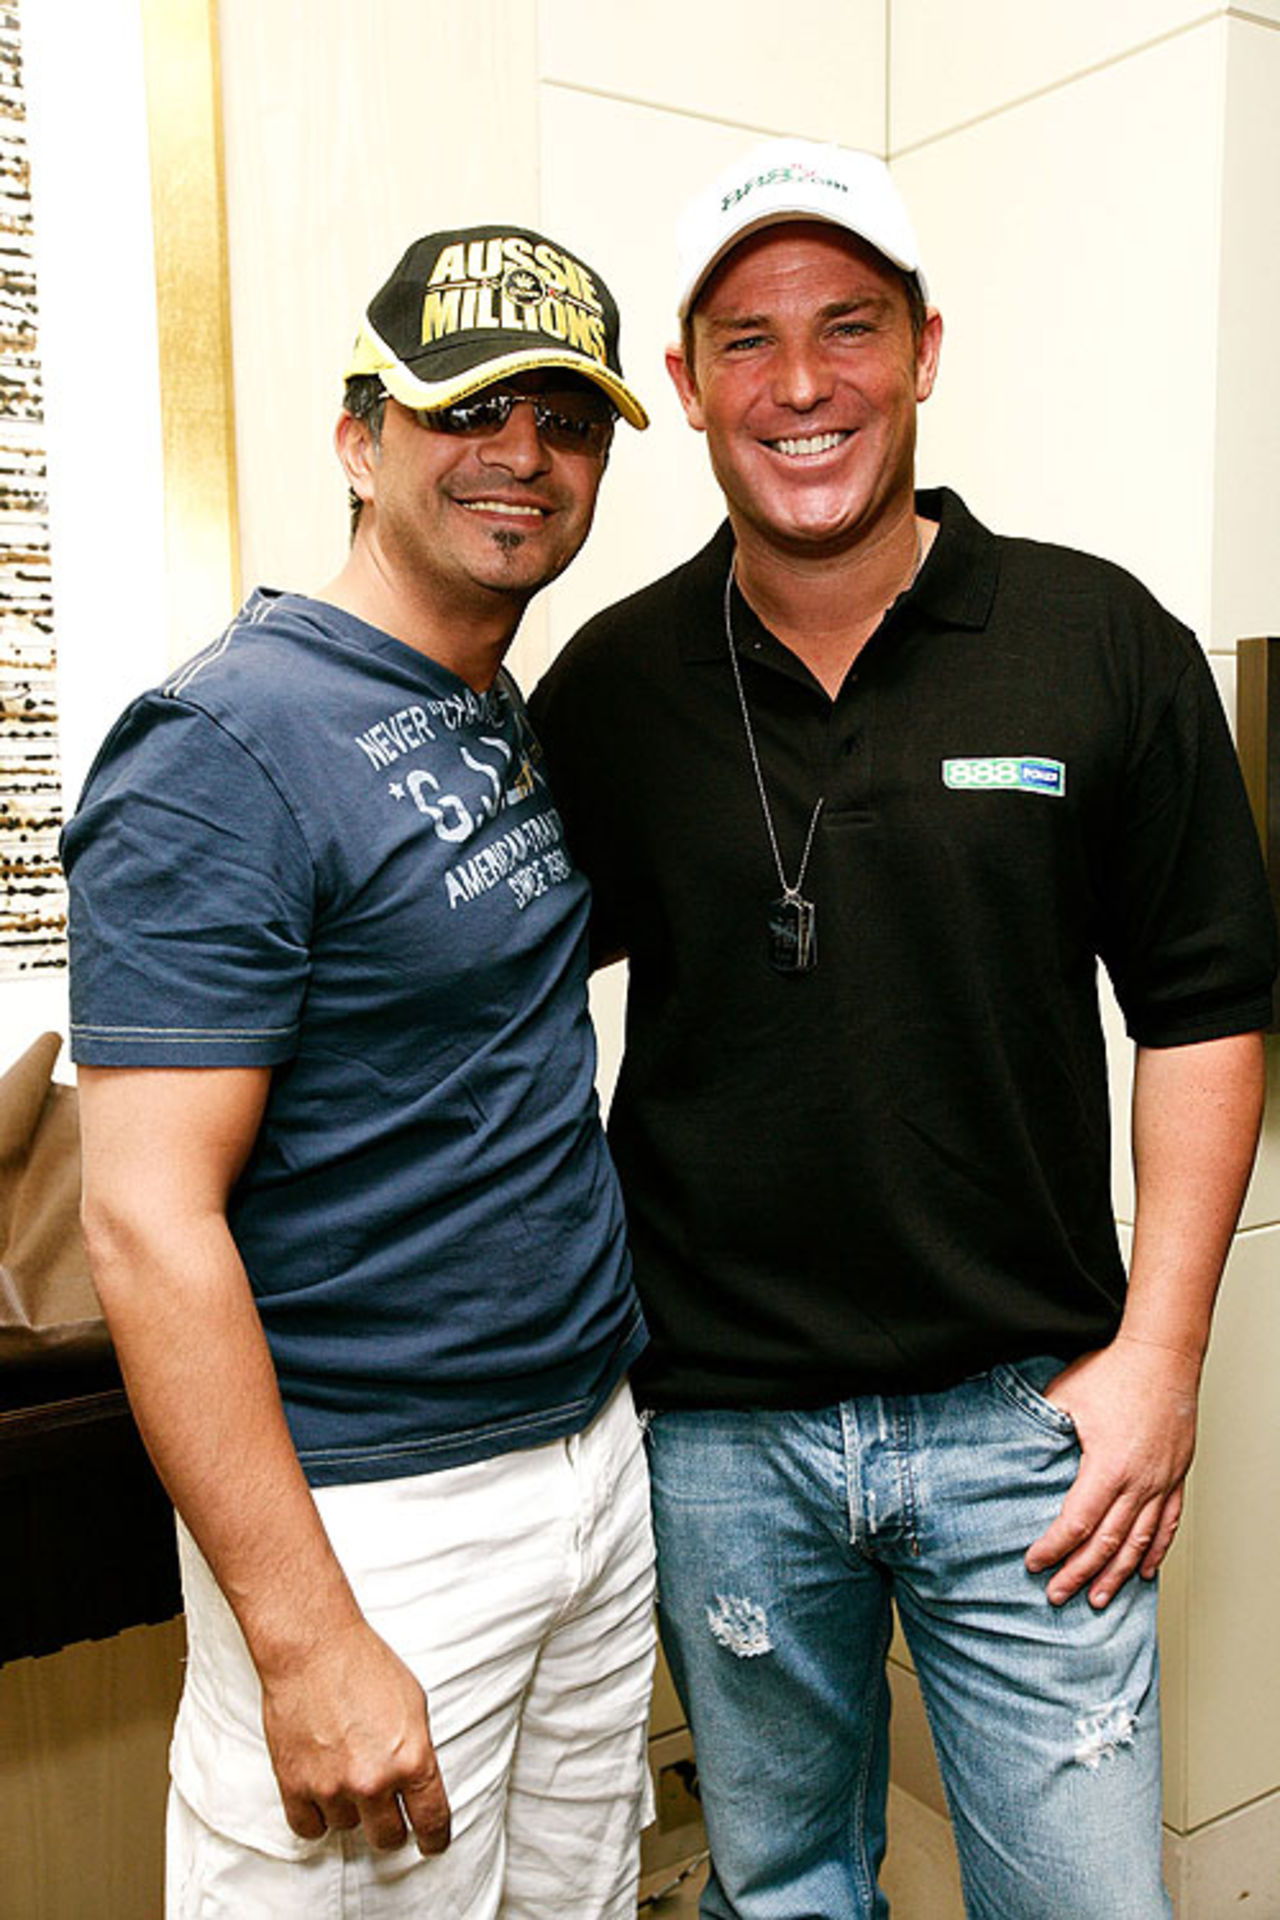 Shane Warne poses with poker champion Joe Hachem at Crown Casino, Melbourne, January 16, 2008